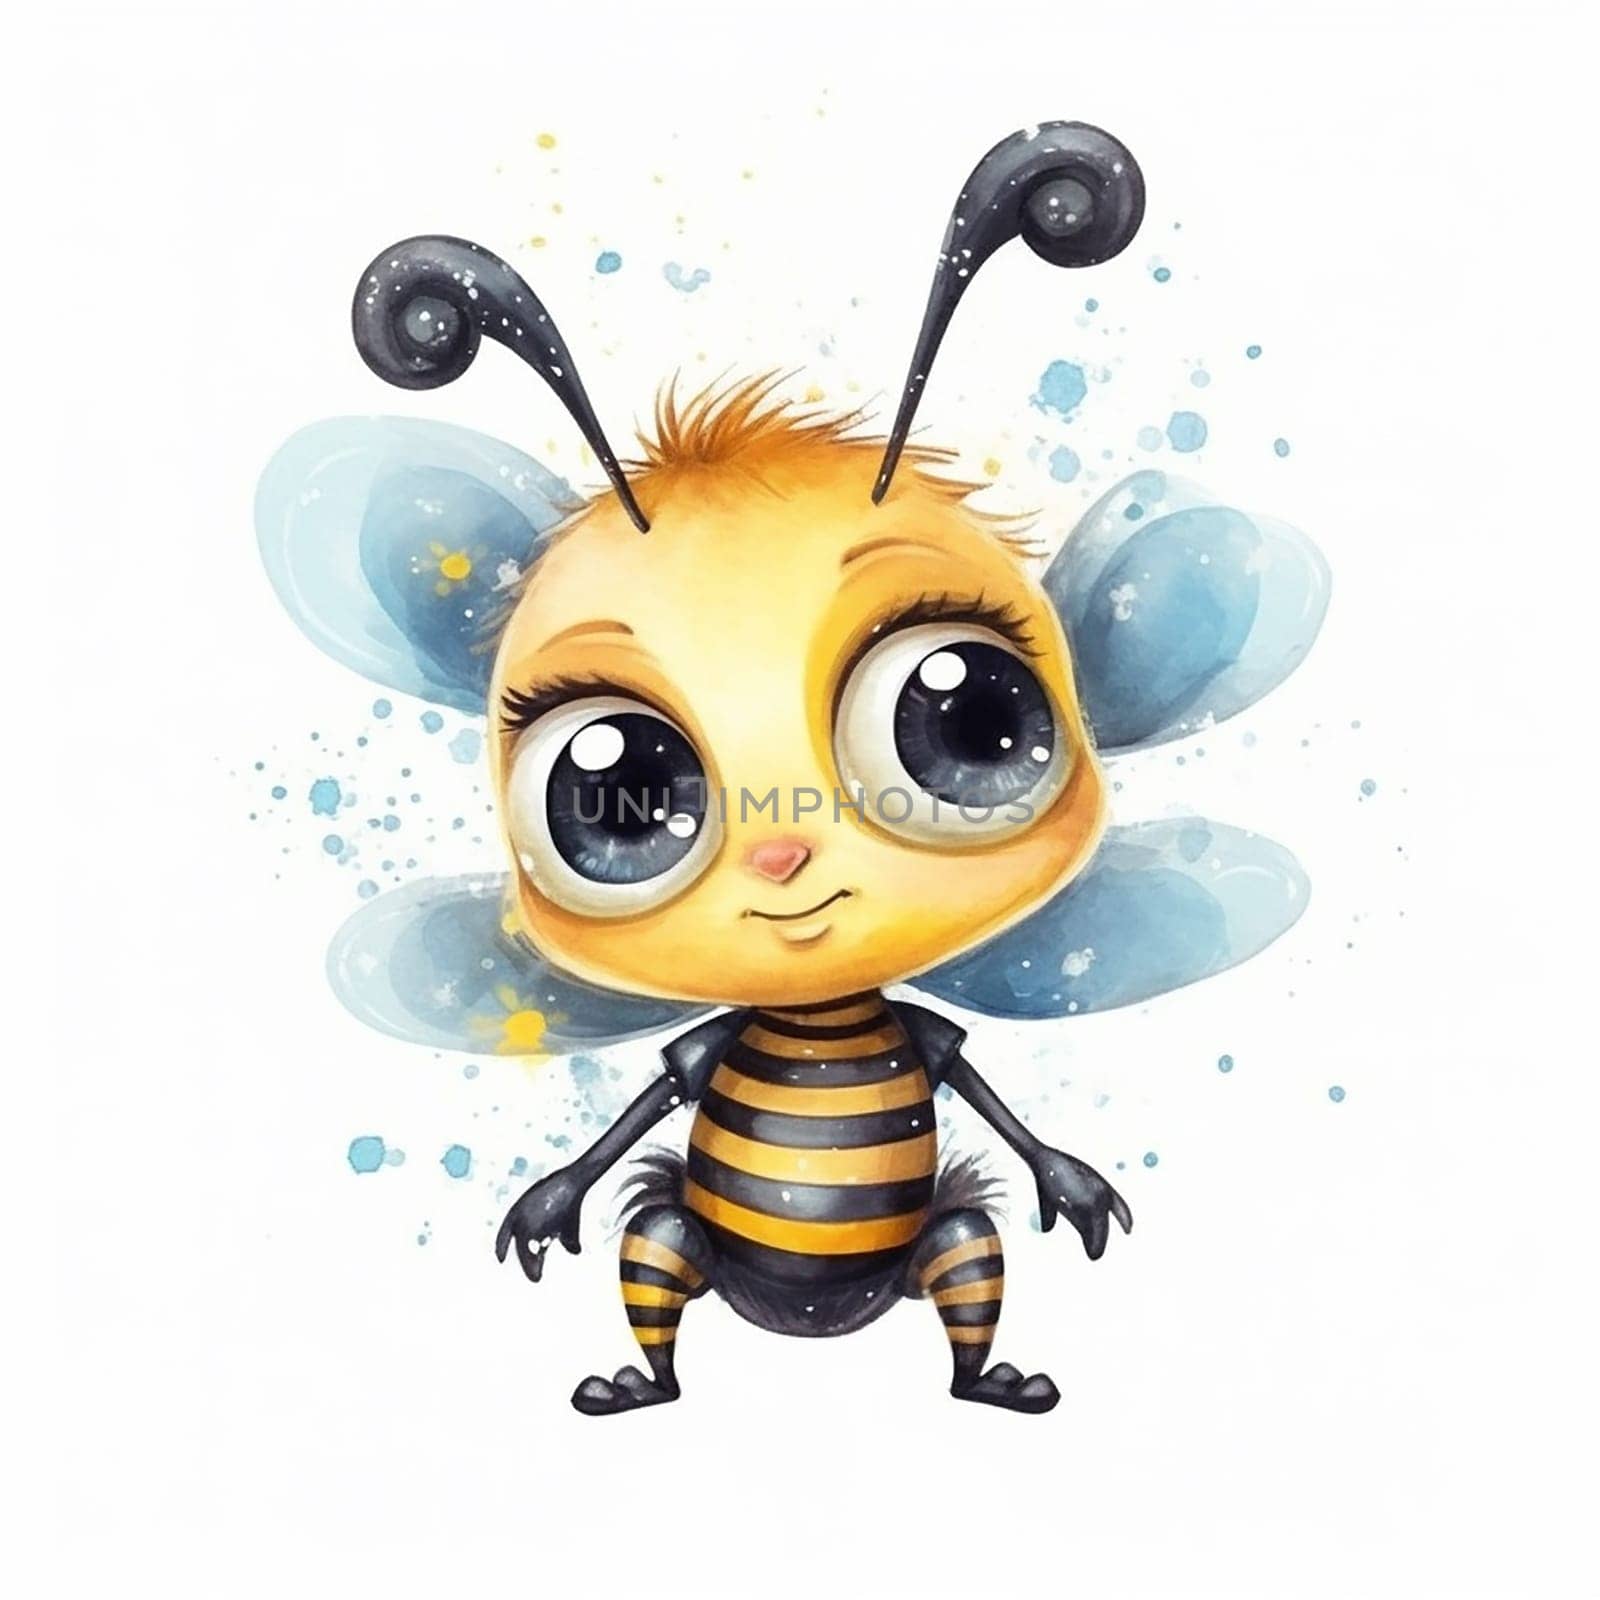 An artistic illustration of a bee with watercolor style on white background by Hype2art